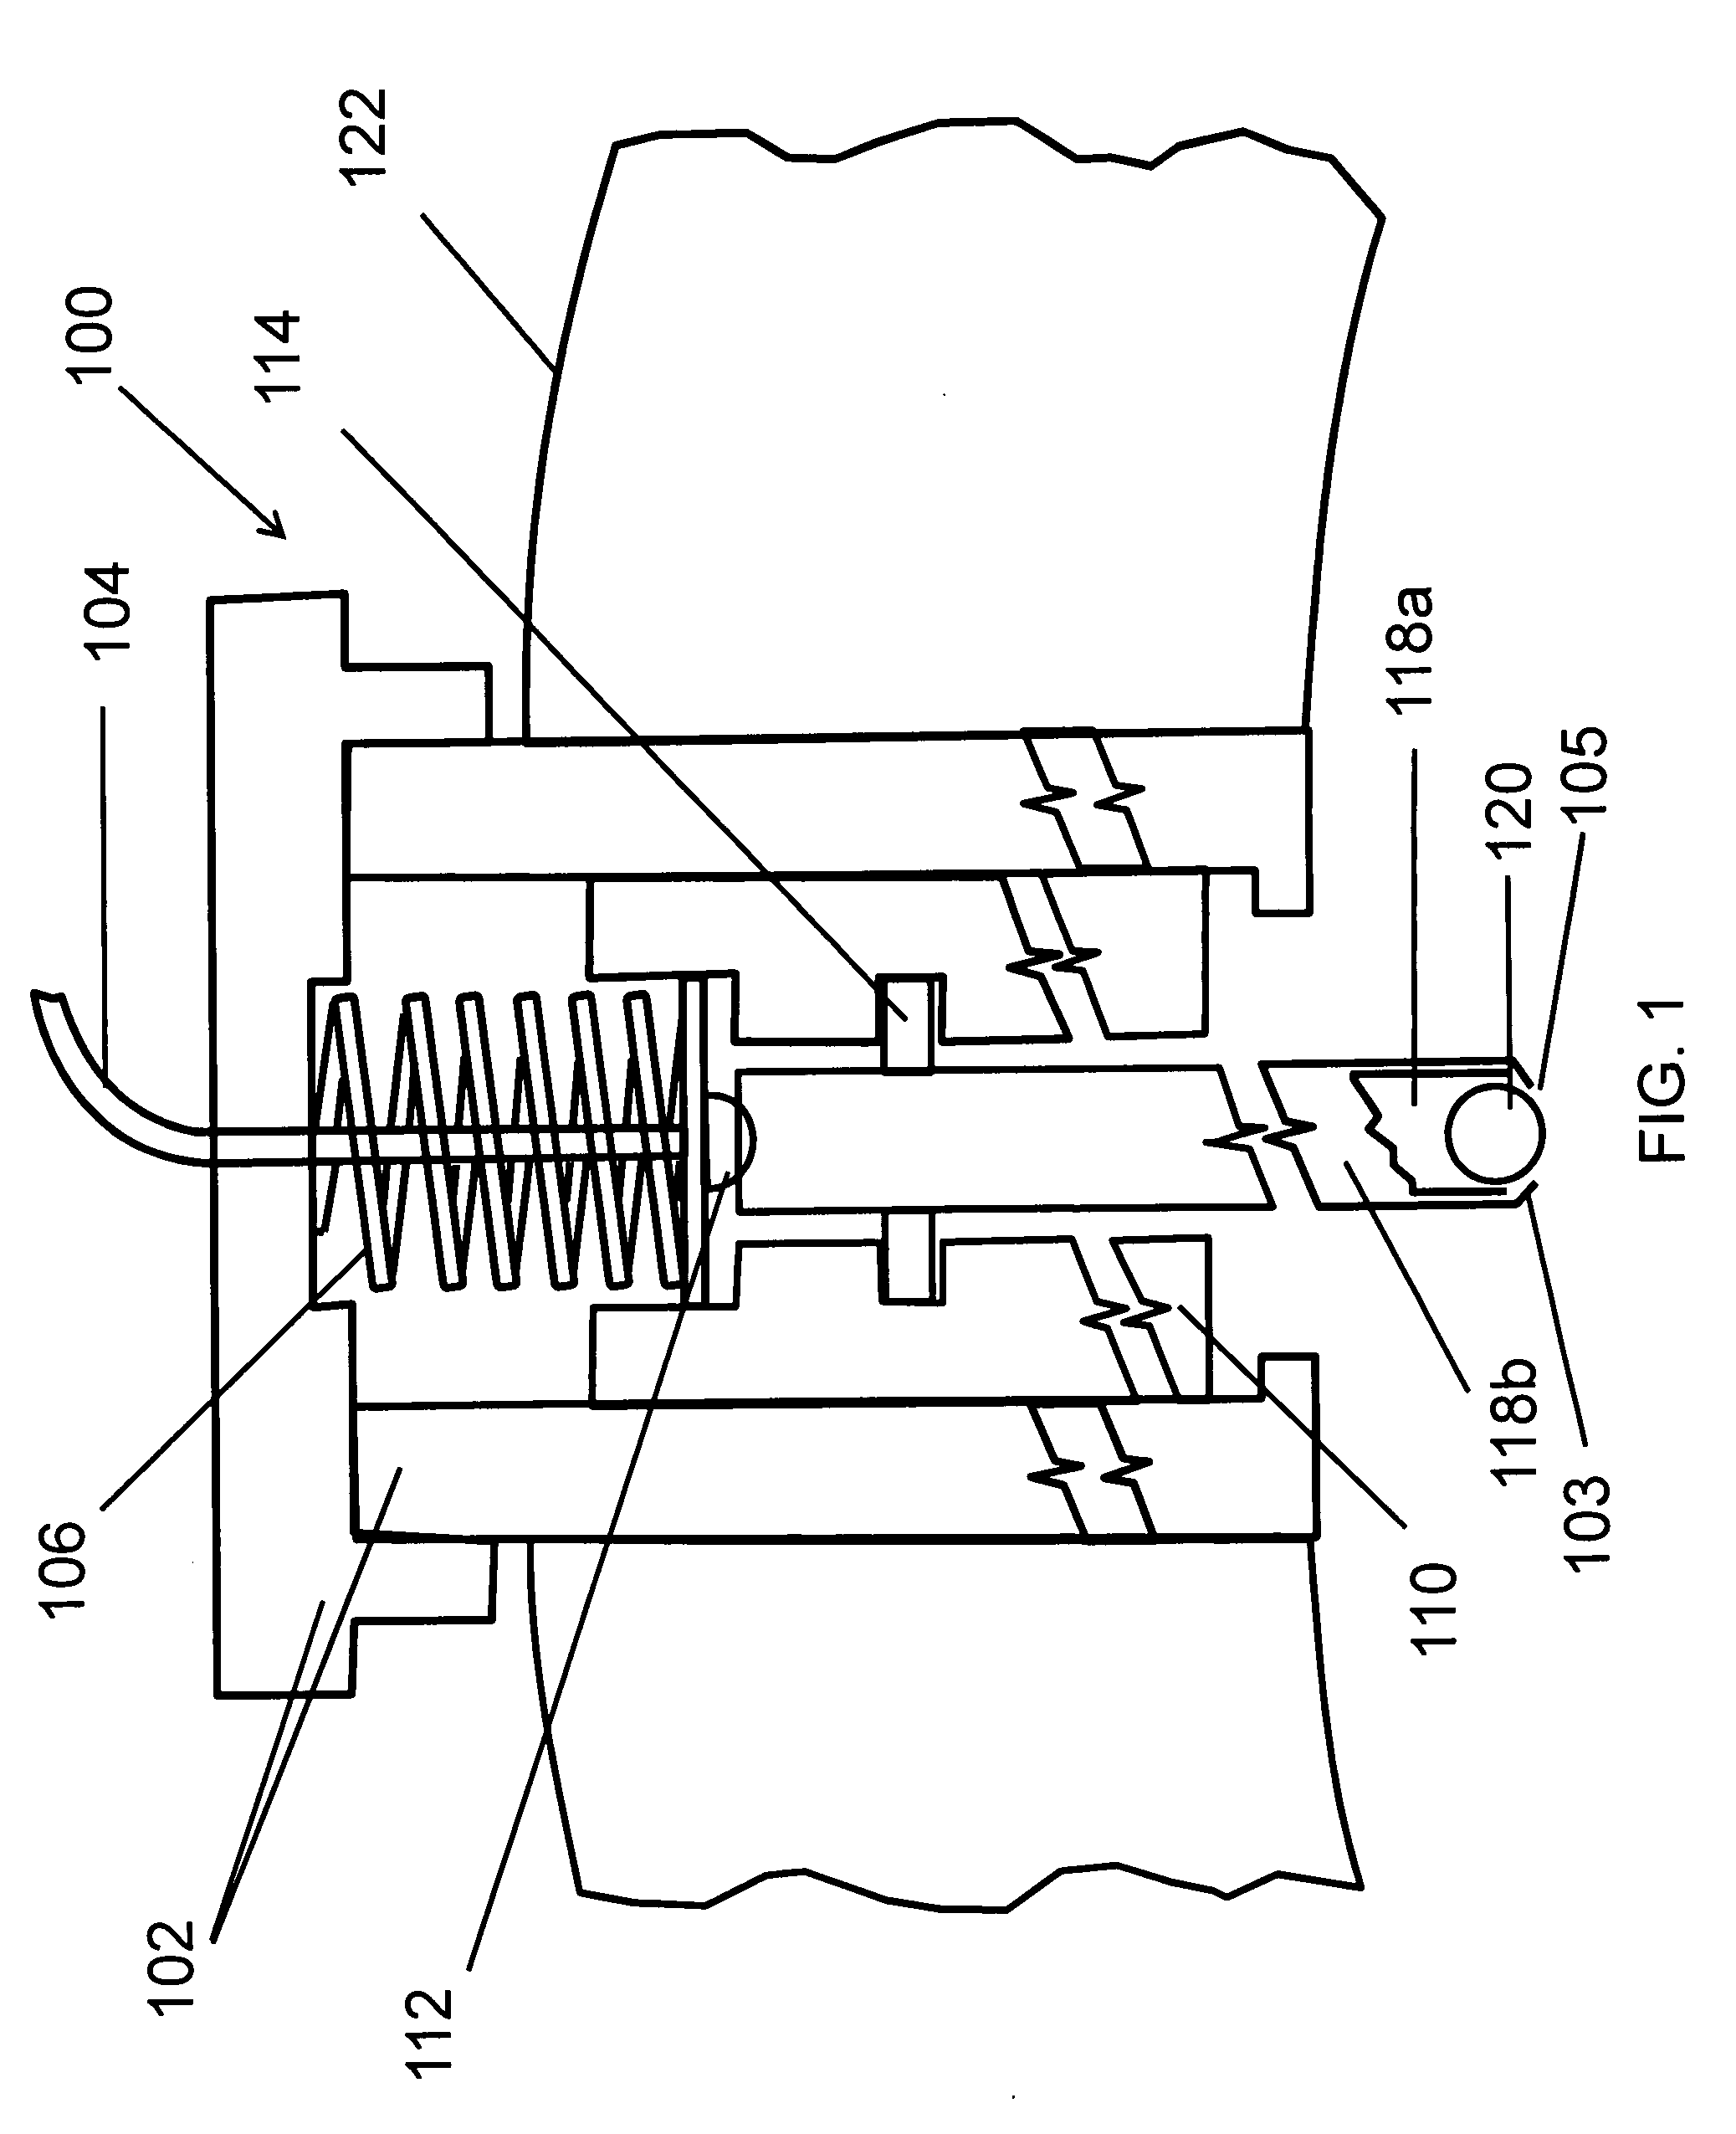 Mobile electroencephalograph data collection and diagnosis system